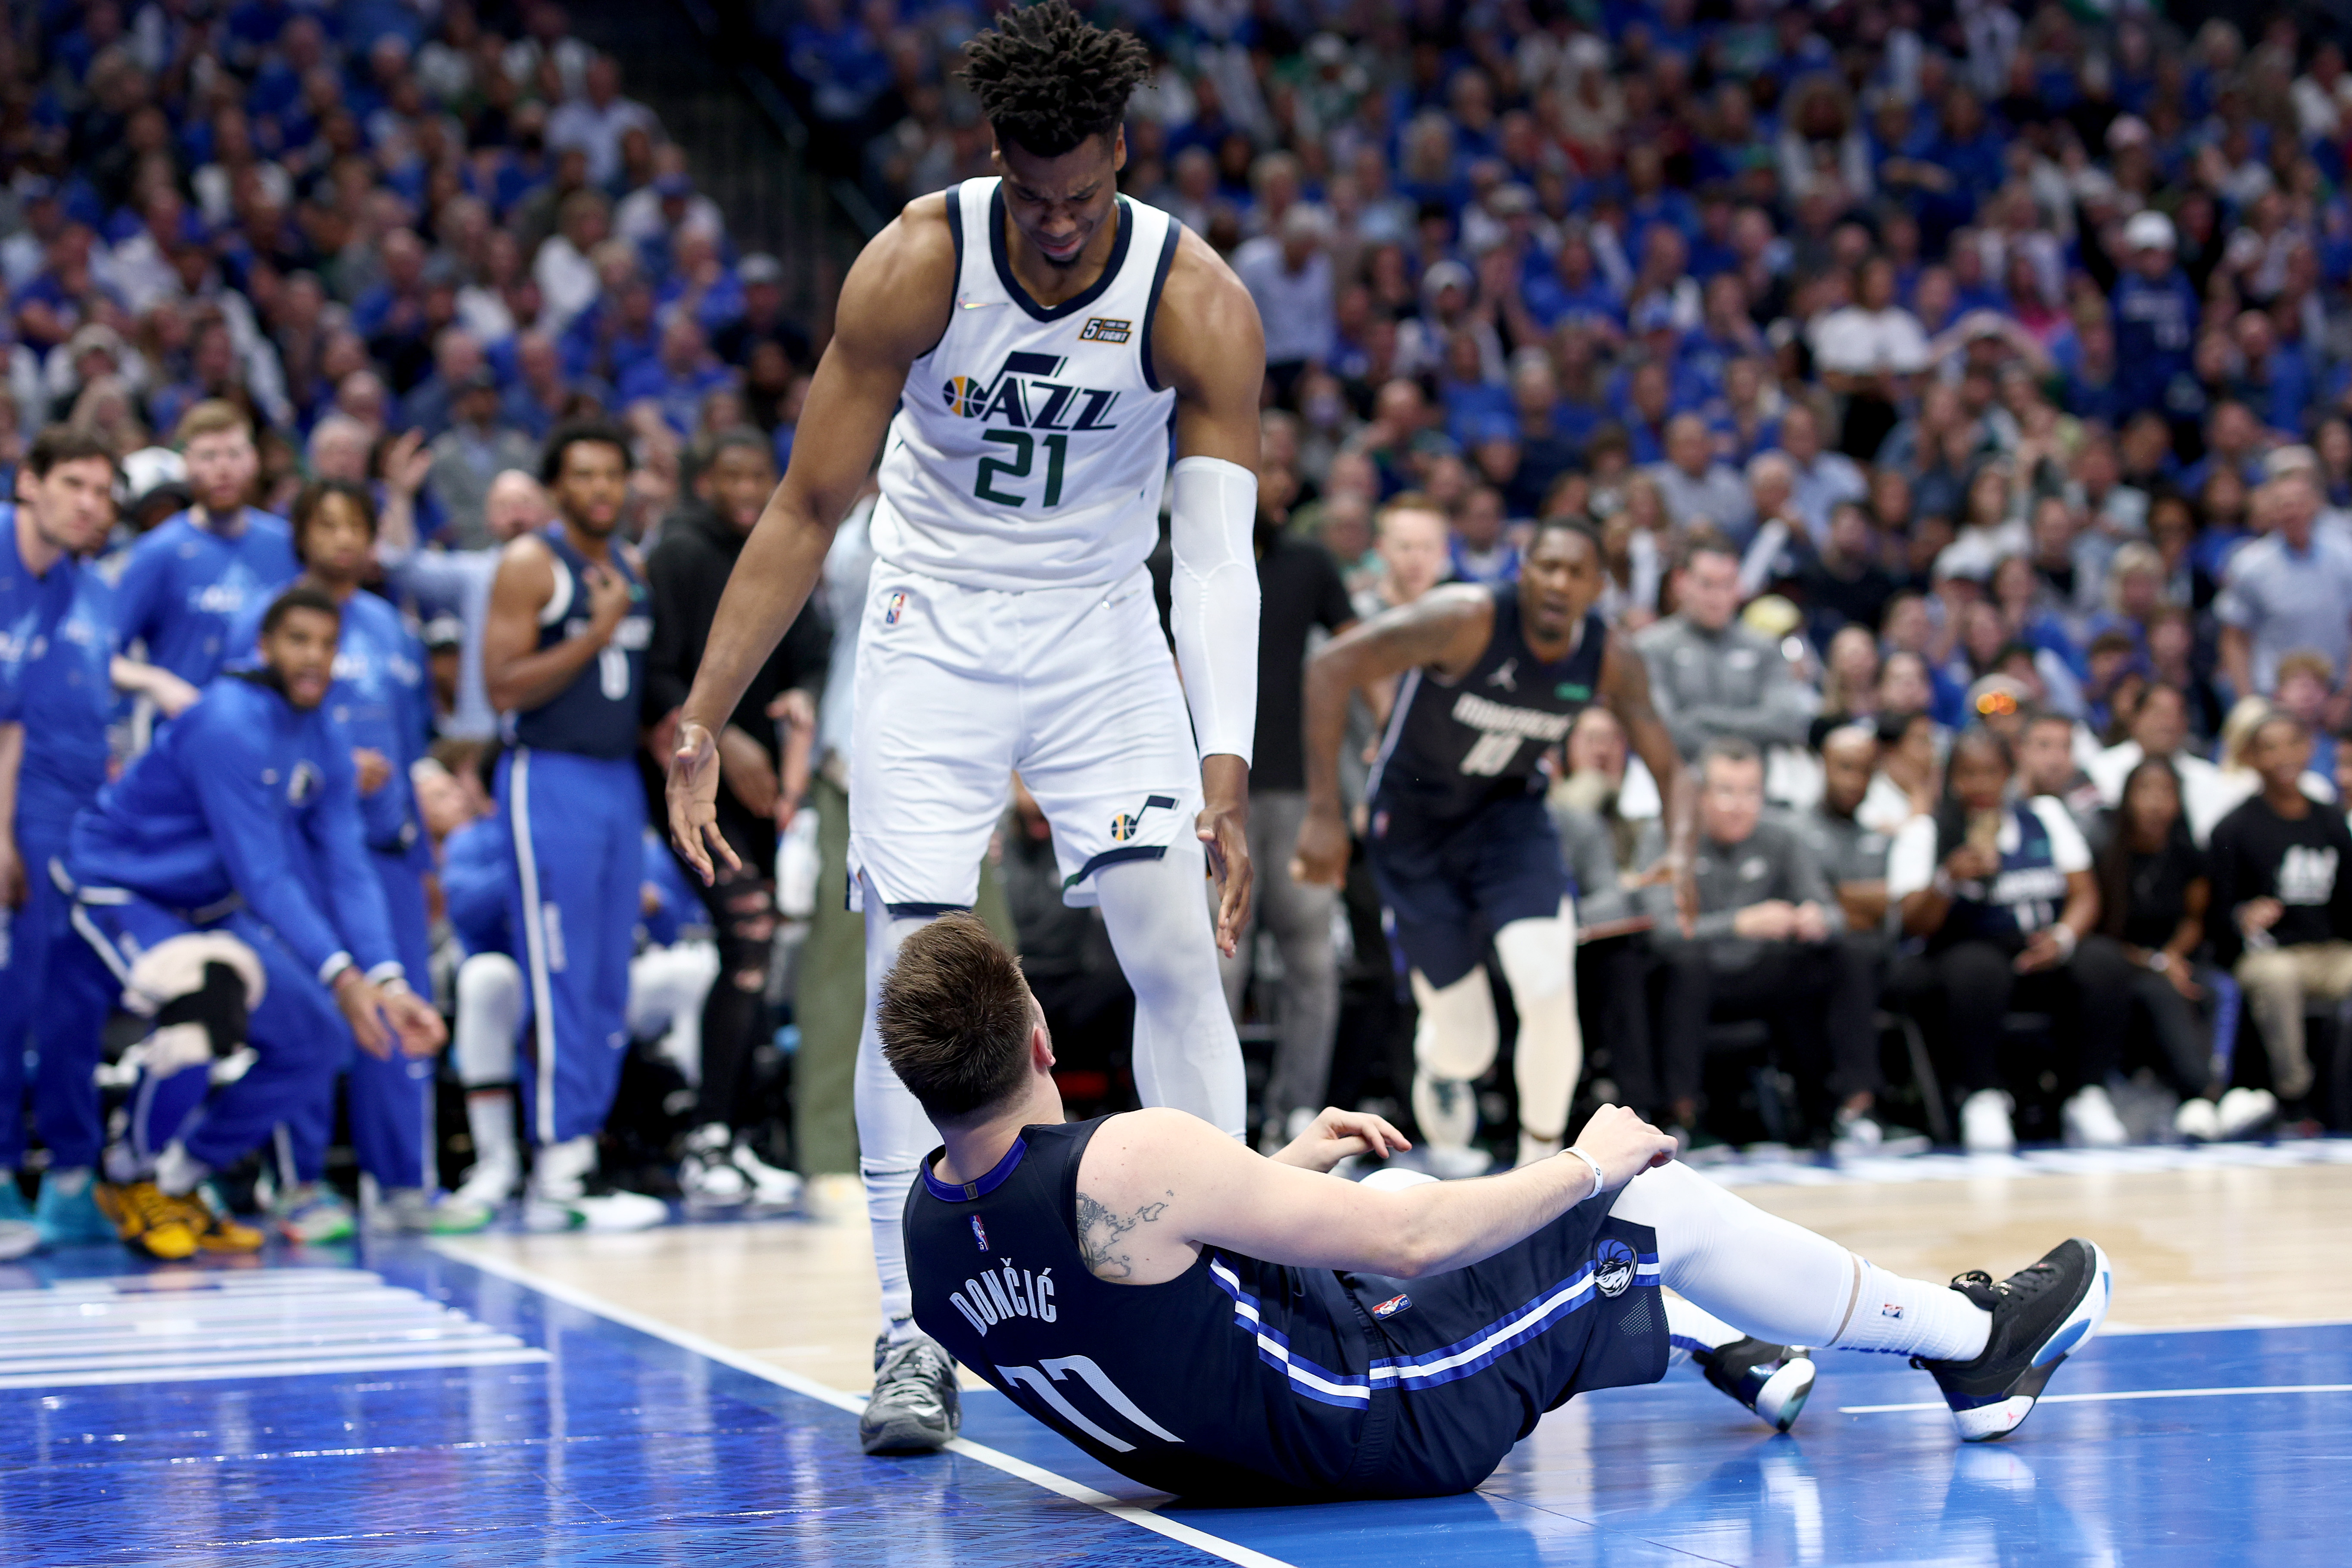 Dallas Cowboys: Mavs move tipoff time Sunday to avoid conflict